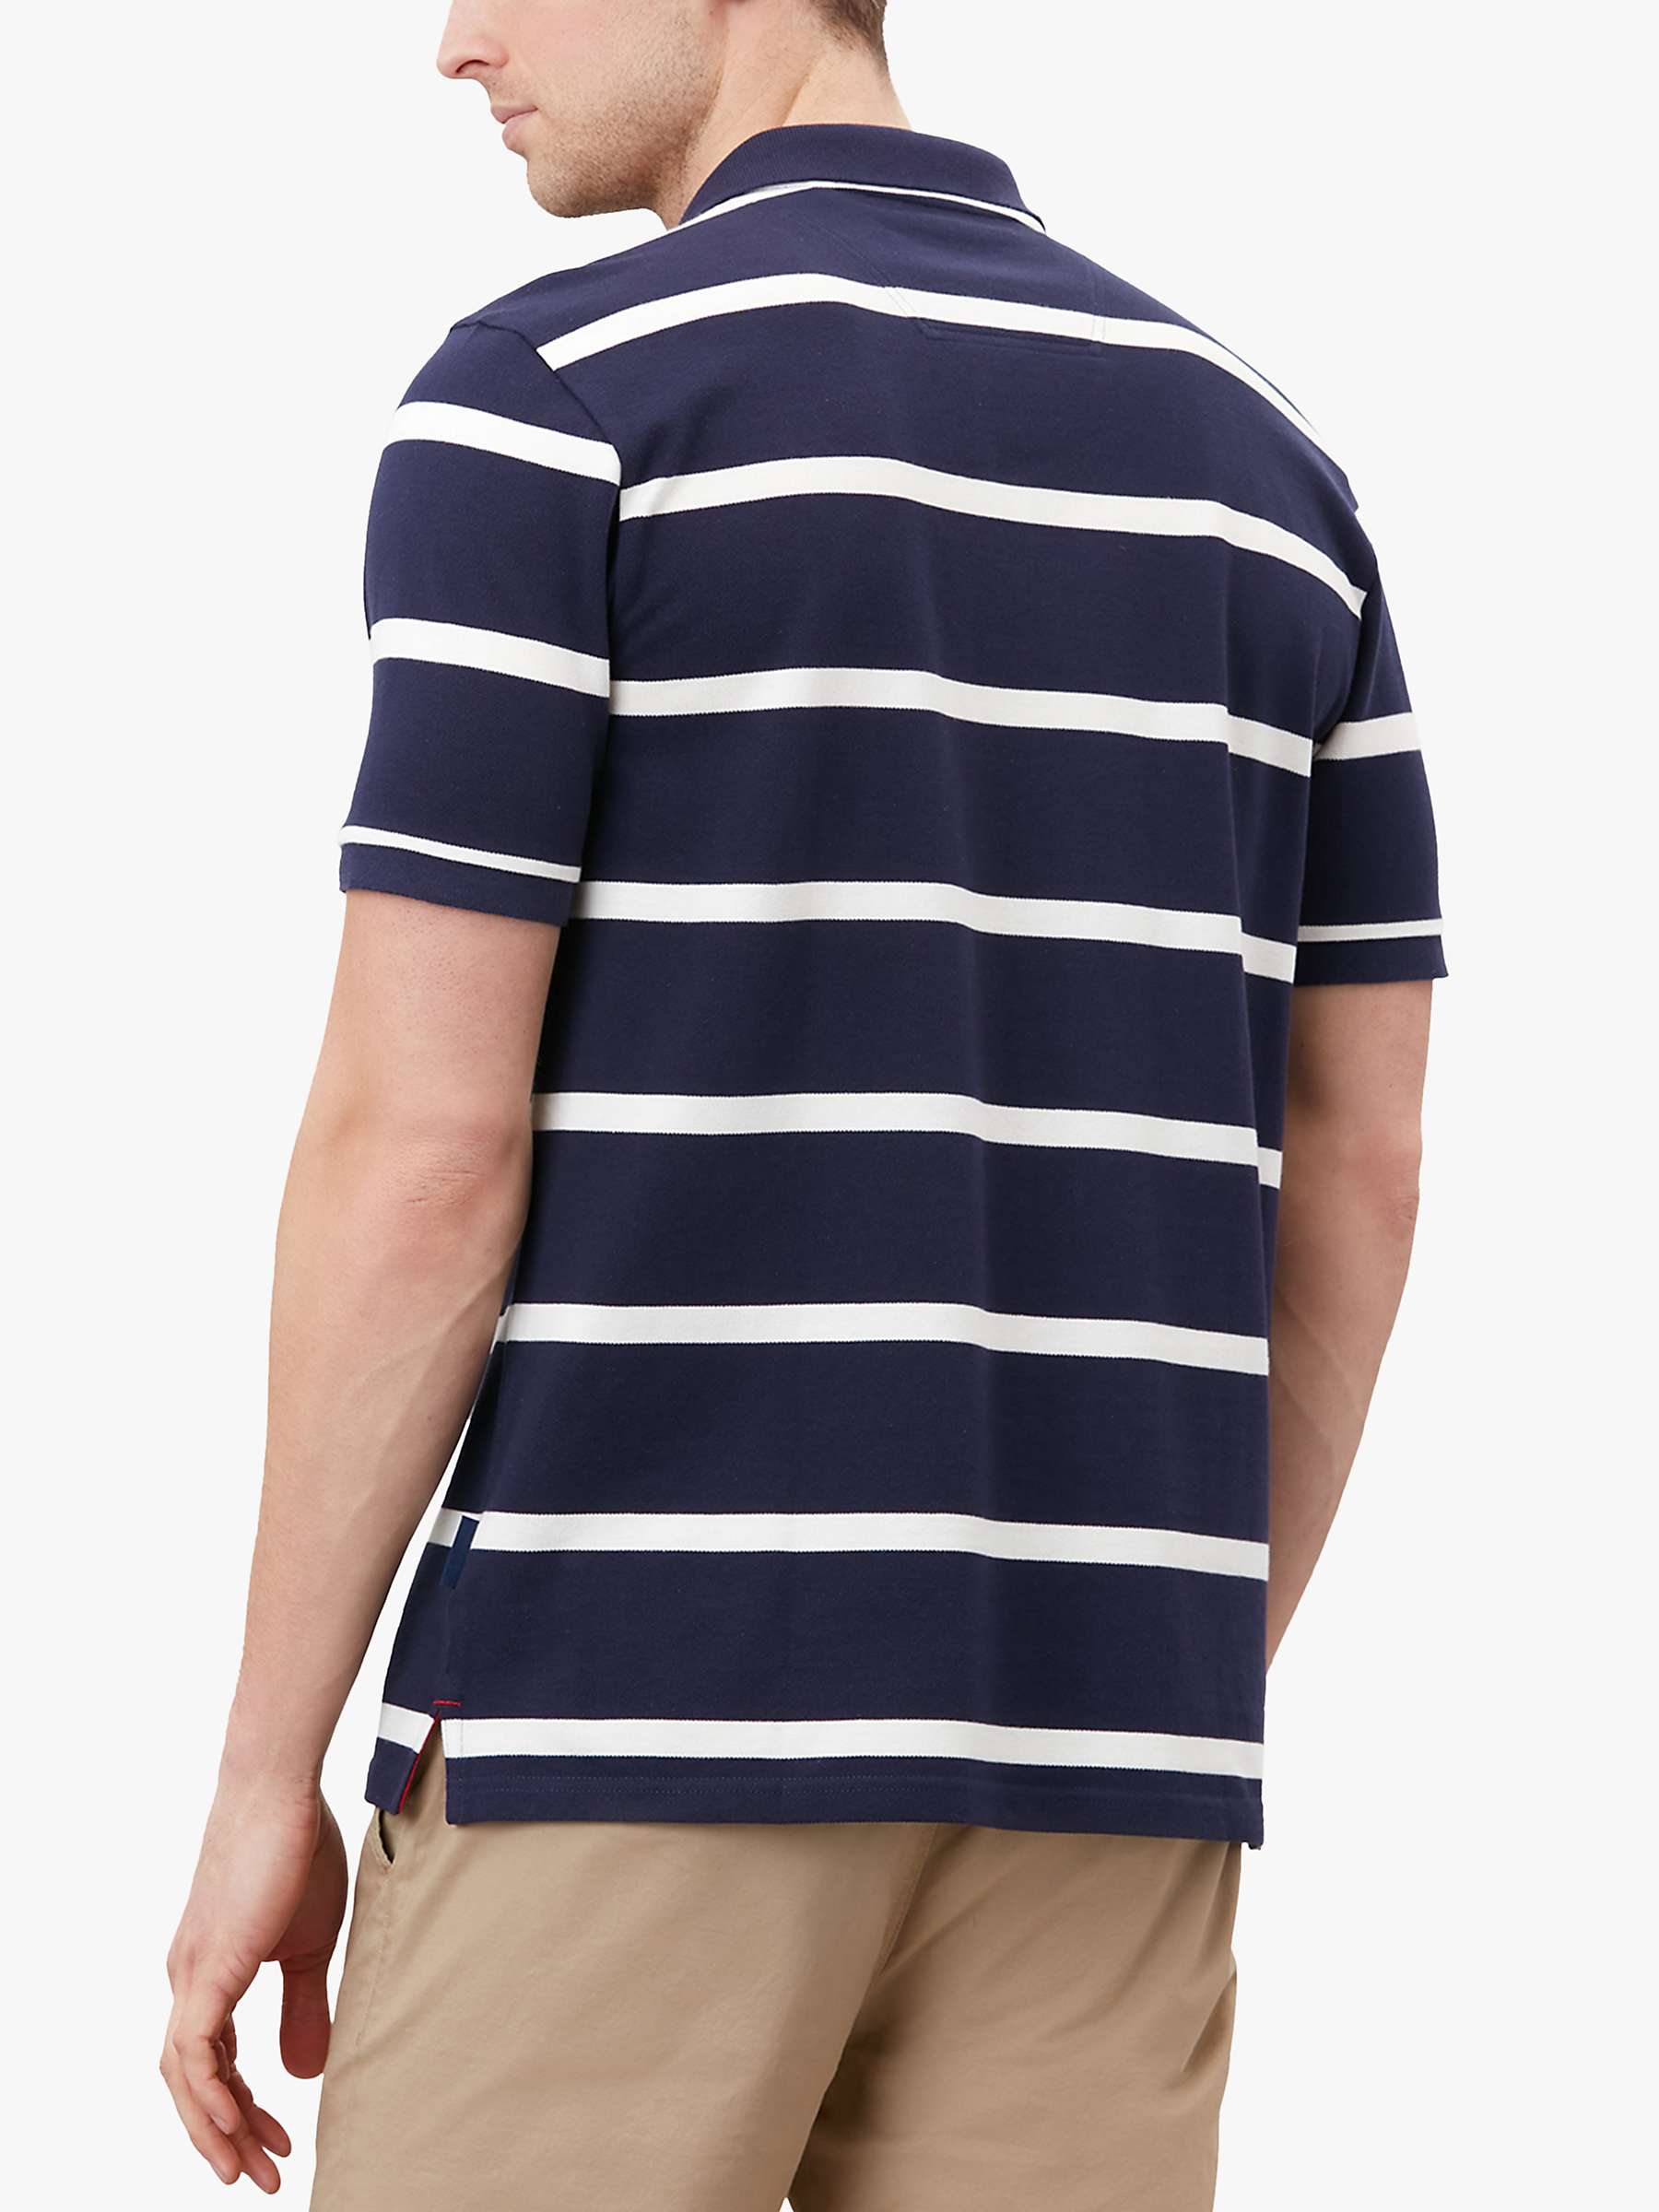 Buy Joules Striped Short Sleeve Polo Top, Navy/White Online at johnlewis.com